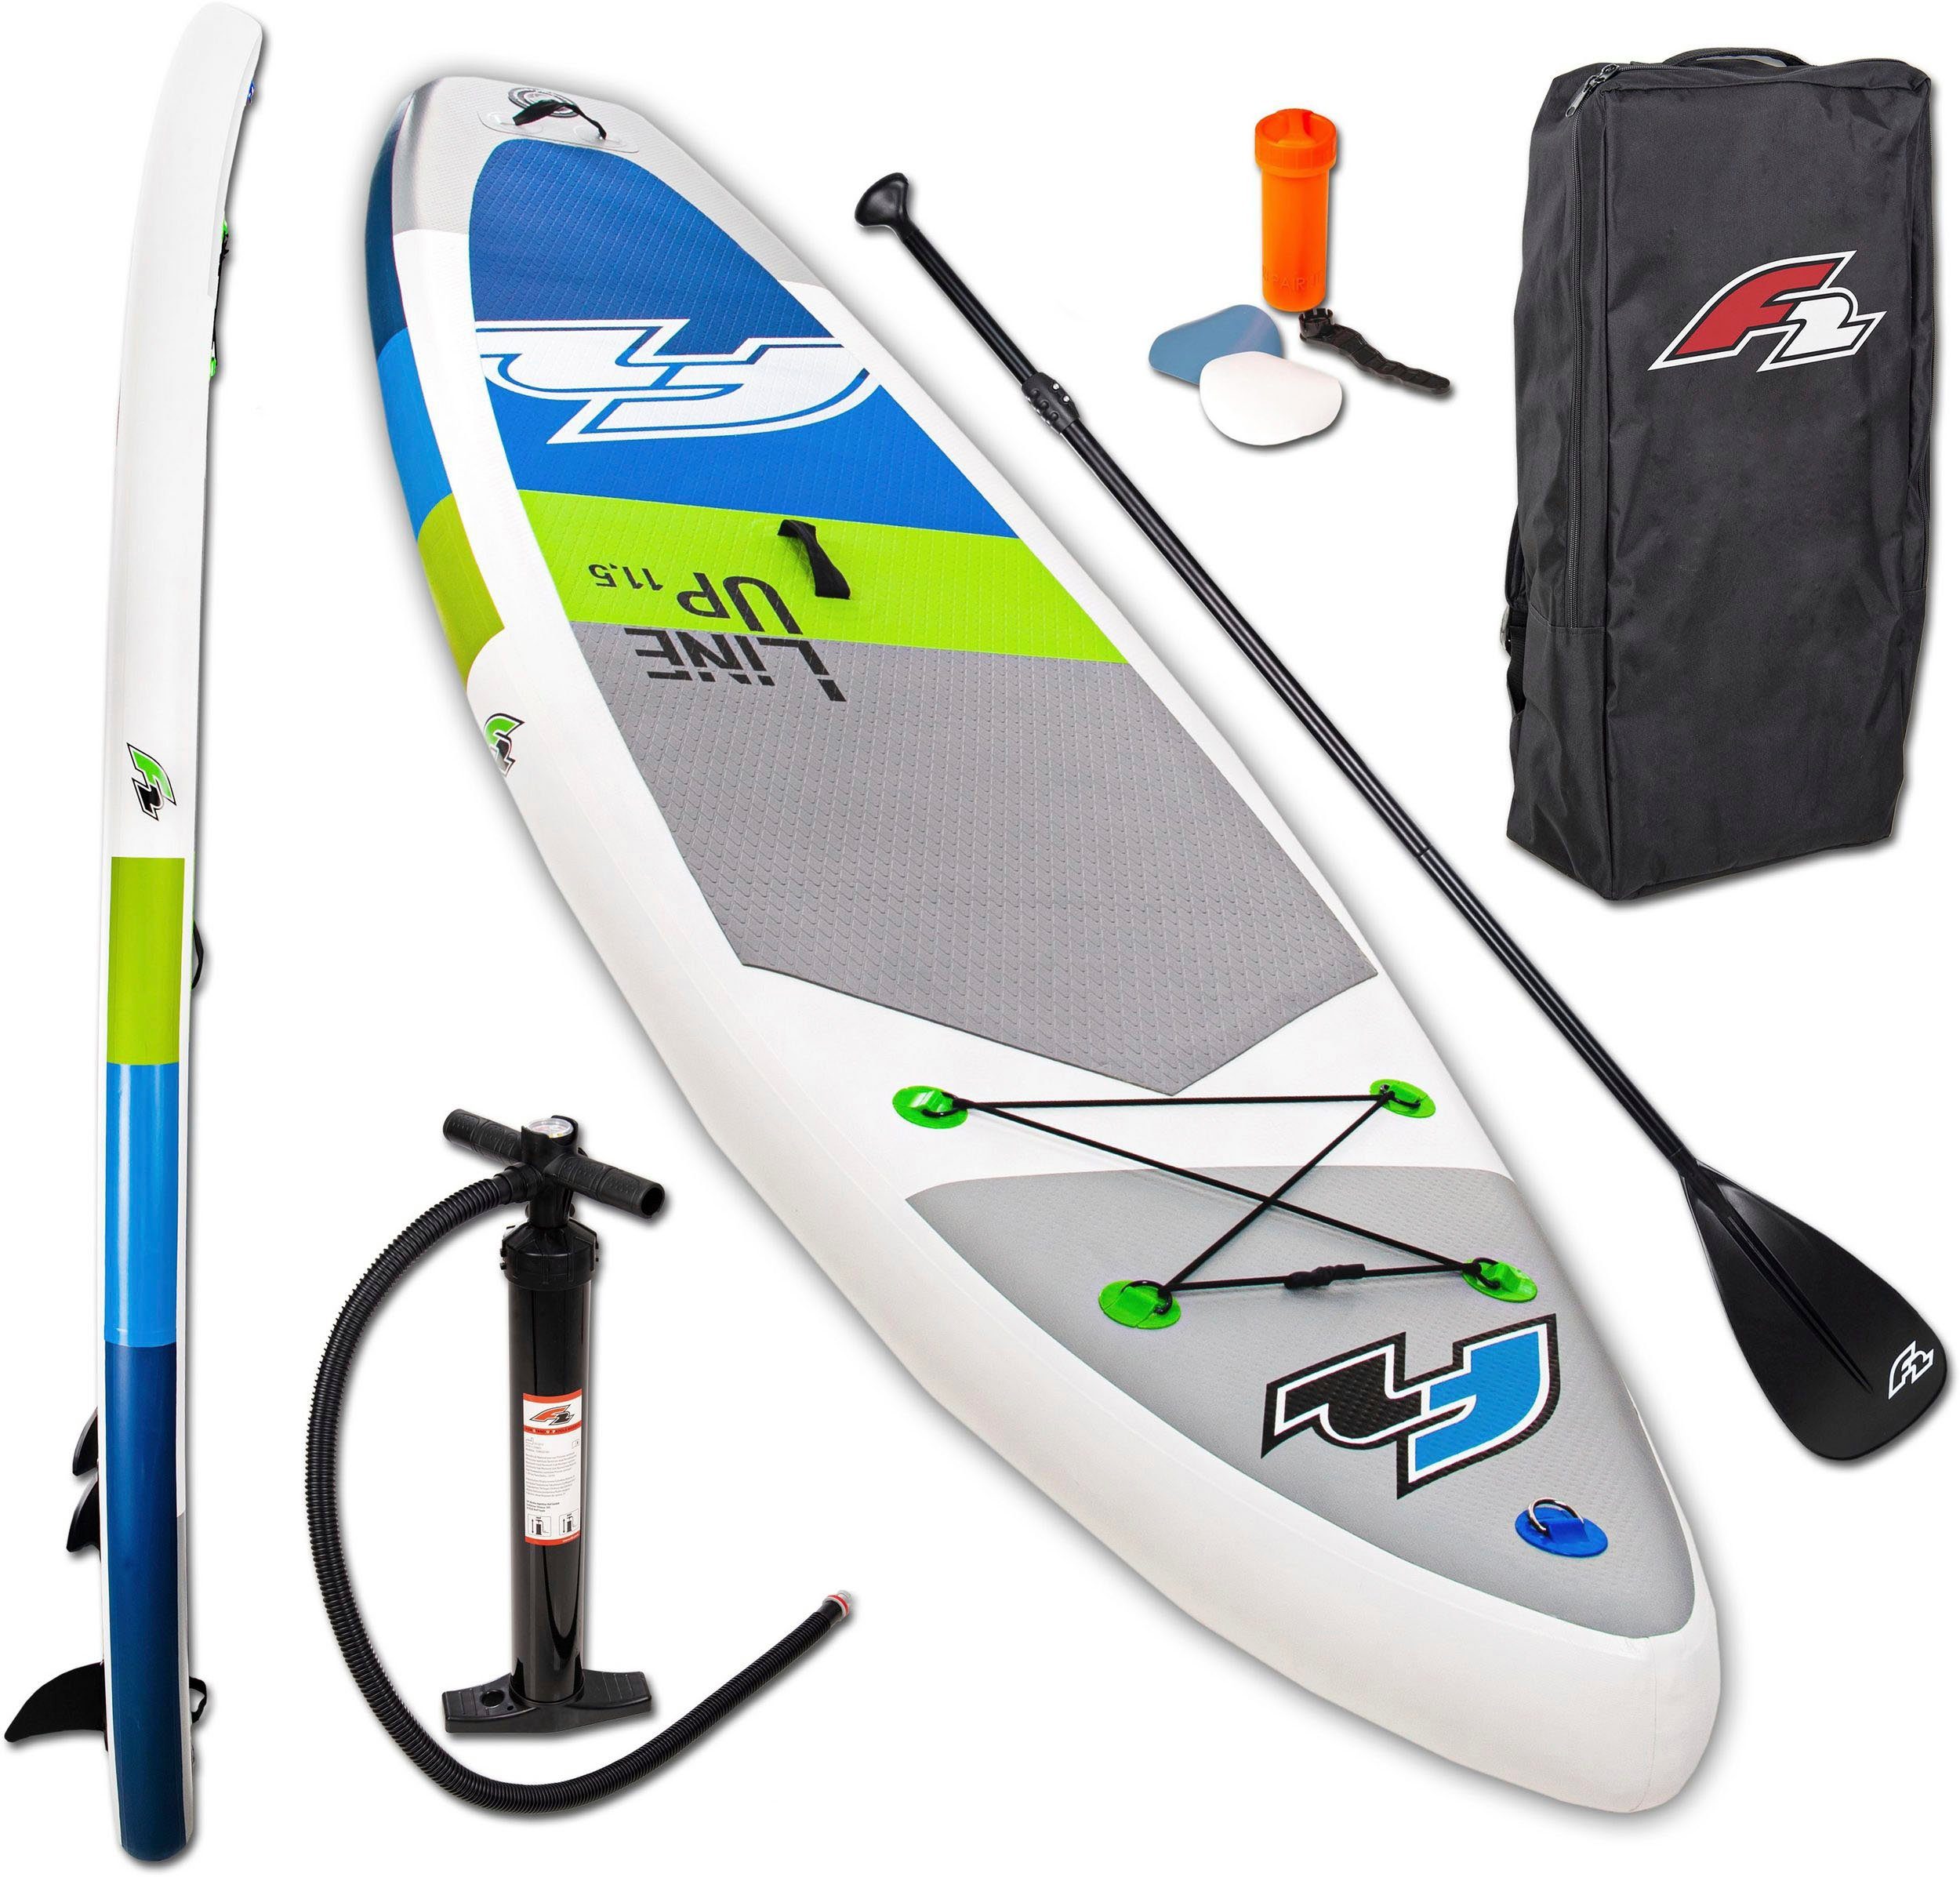 F2 Inflatable SUP-Board F2 Line Up SMO blue mit Alupaddel, (Set, 5 tlg), Stand Up Paddling